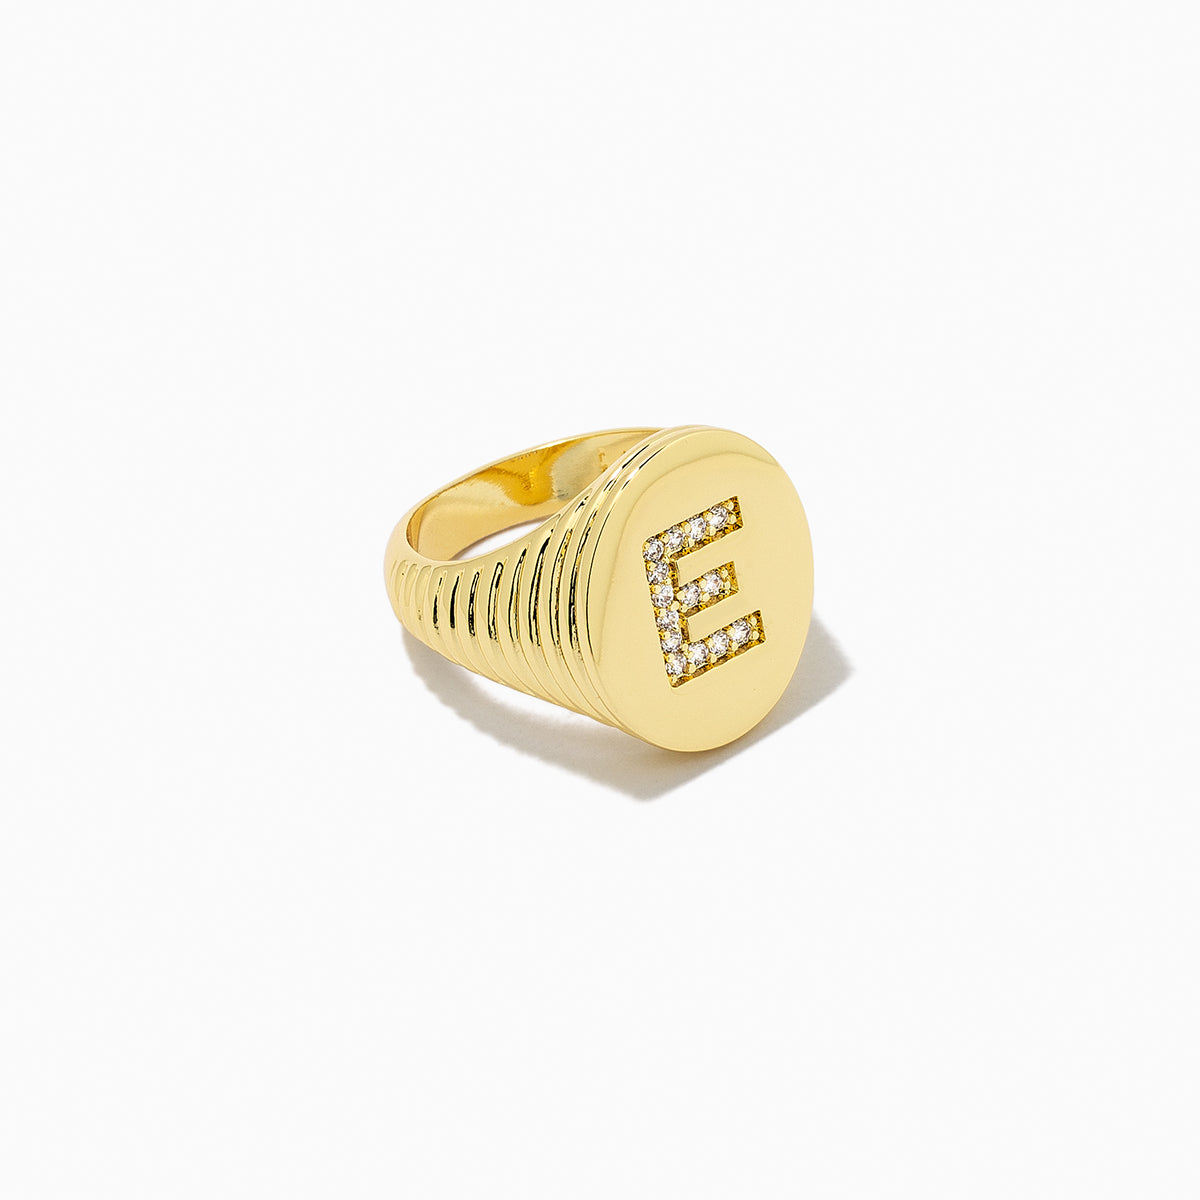 Initial Here Ring | Gold E 6 Gold E 7 Gold E 8 | Product Image | Uncommon James